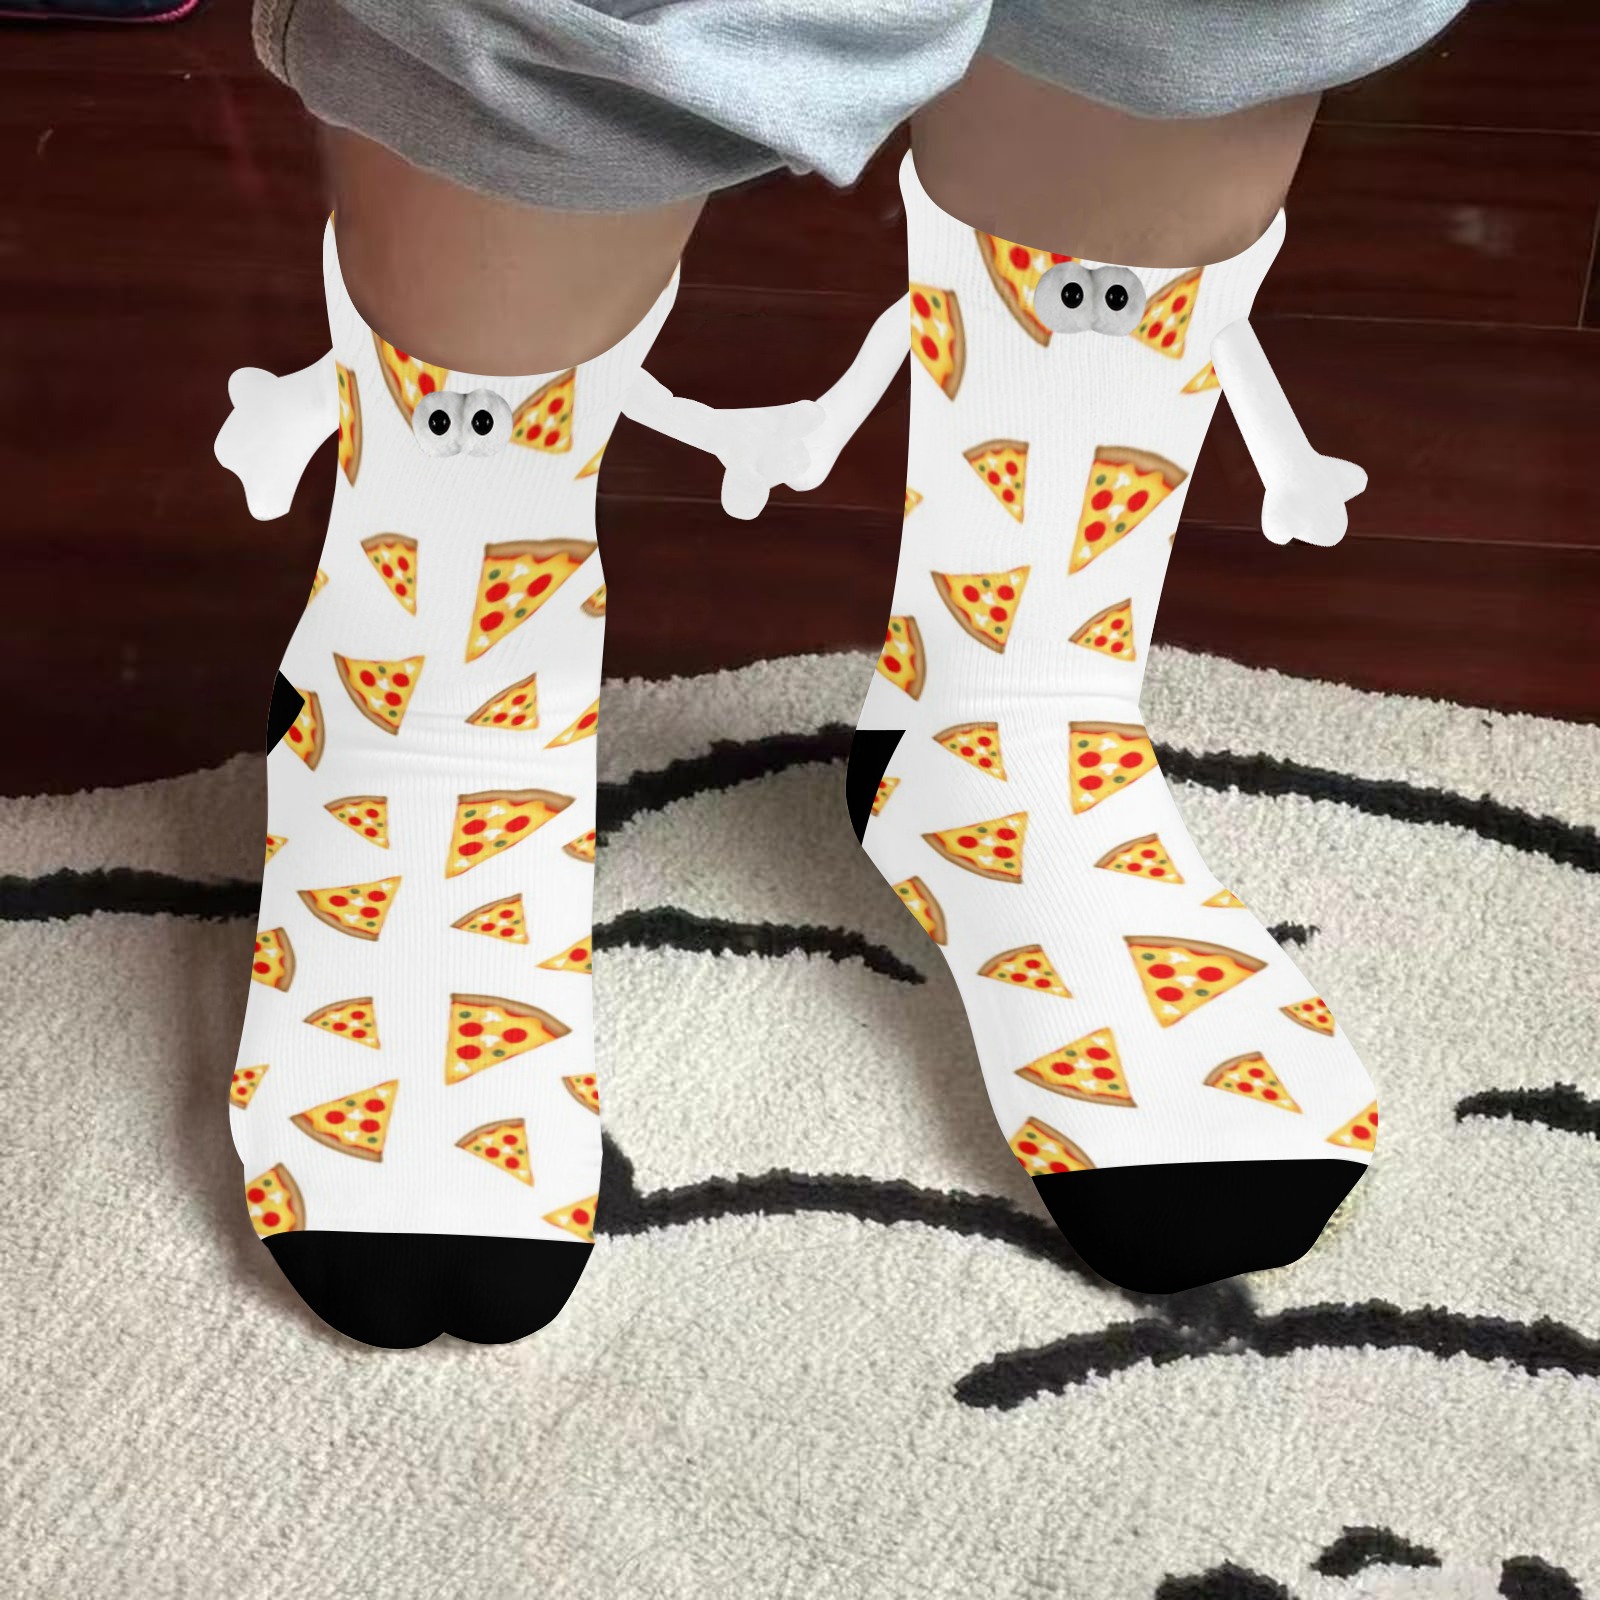 Cool and fun pizza slices pattern on white Holding Hands Socks for Kids